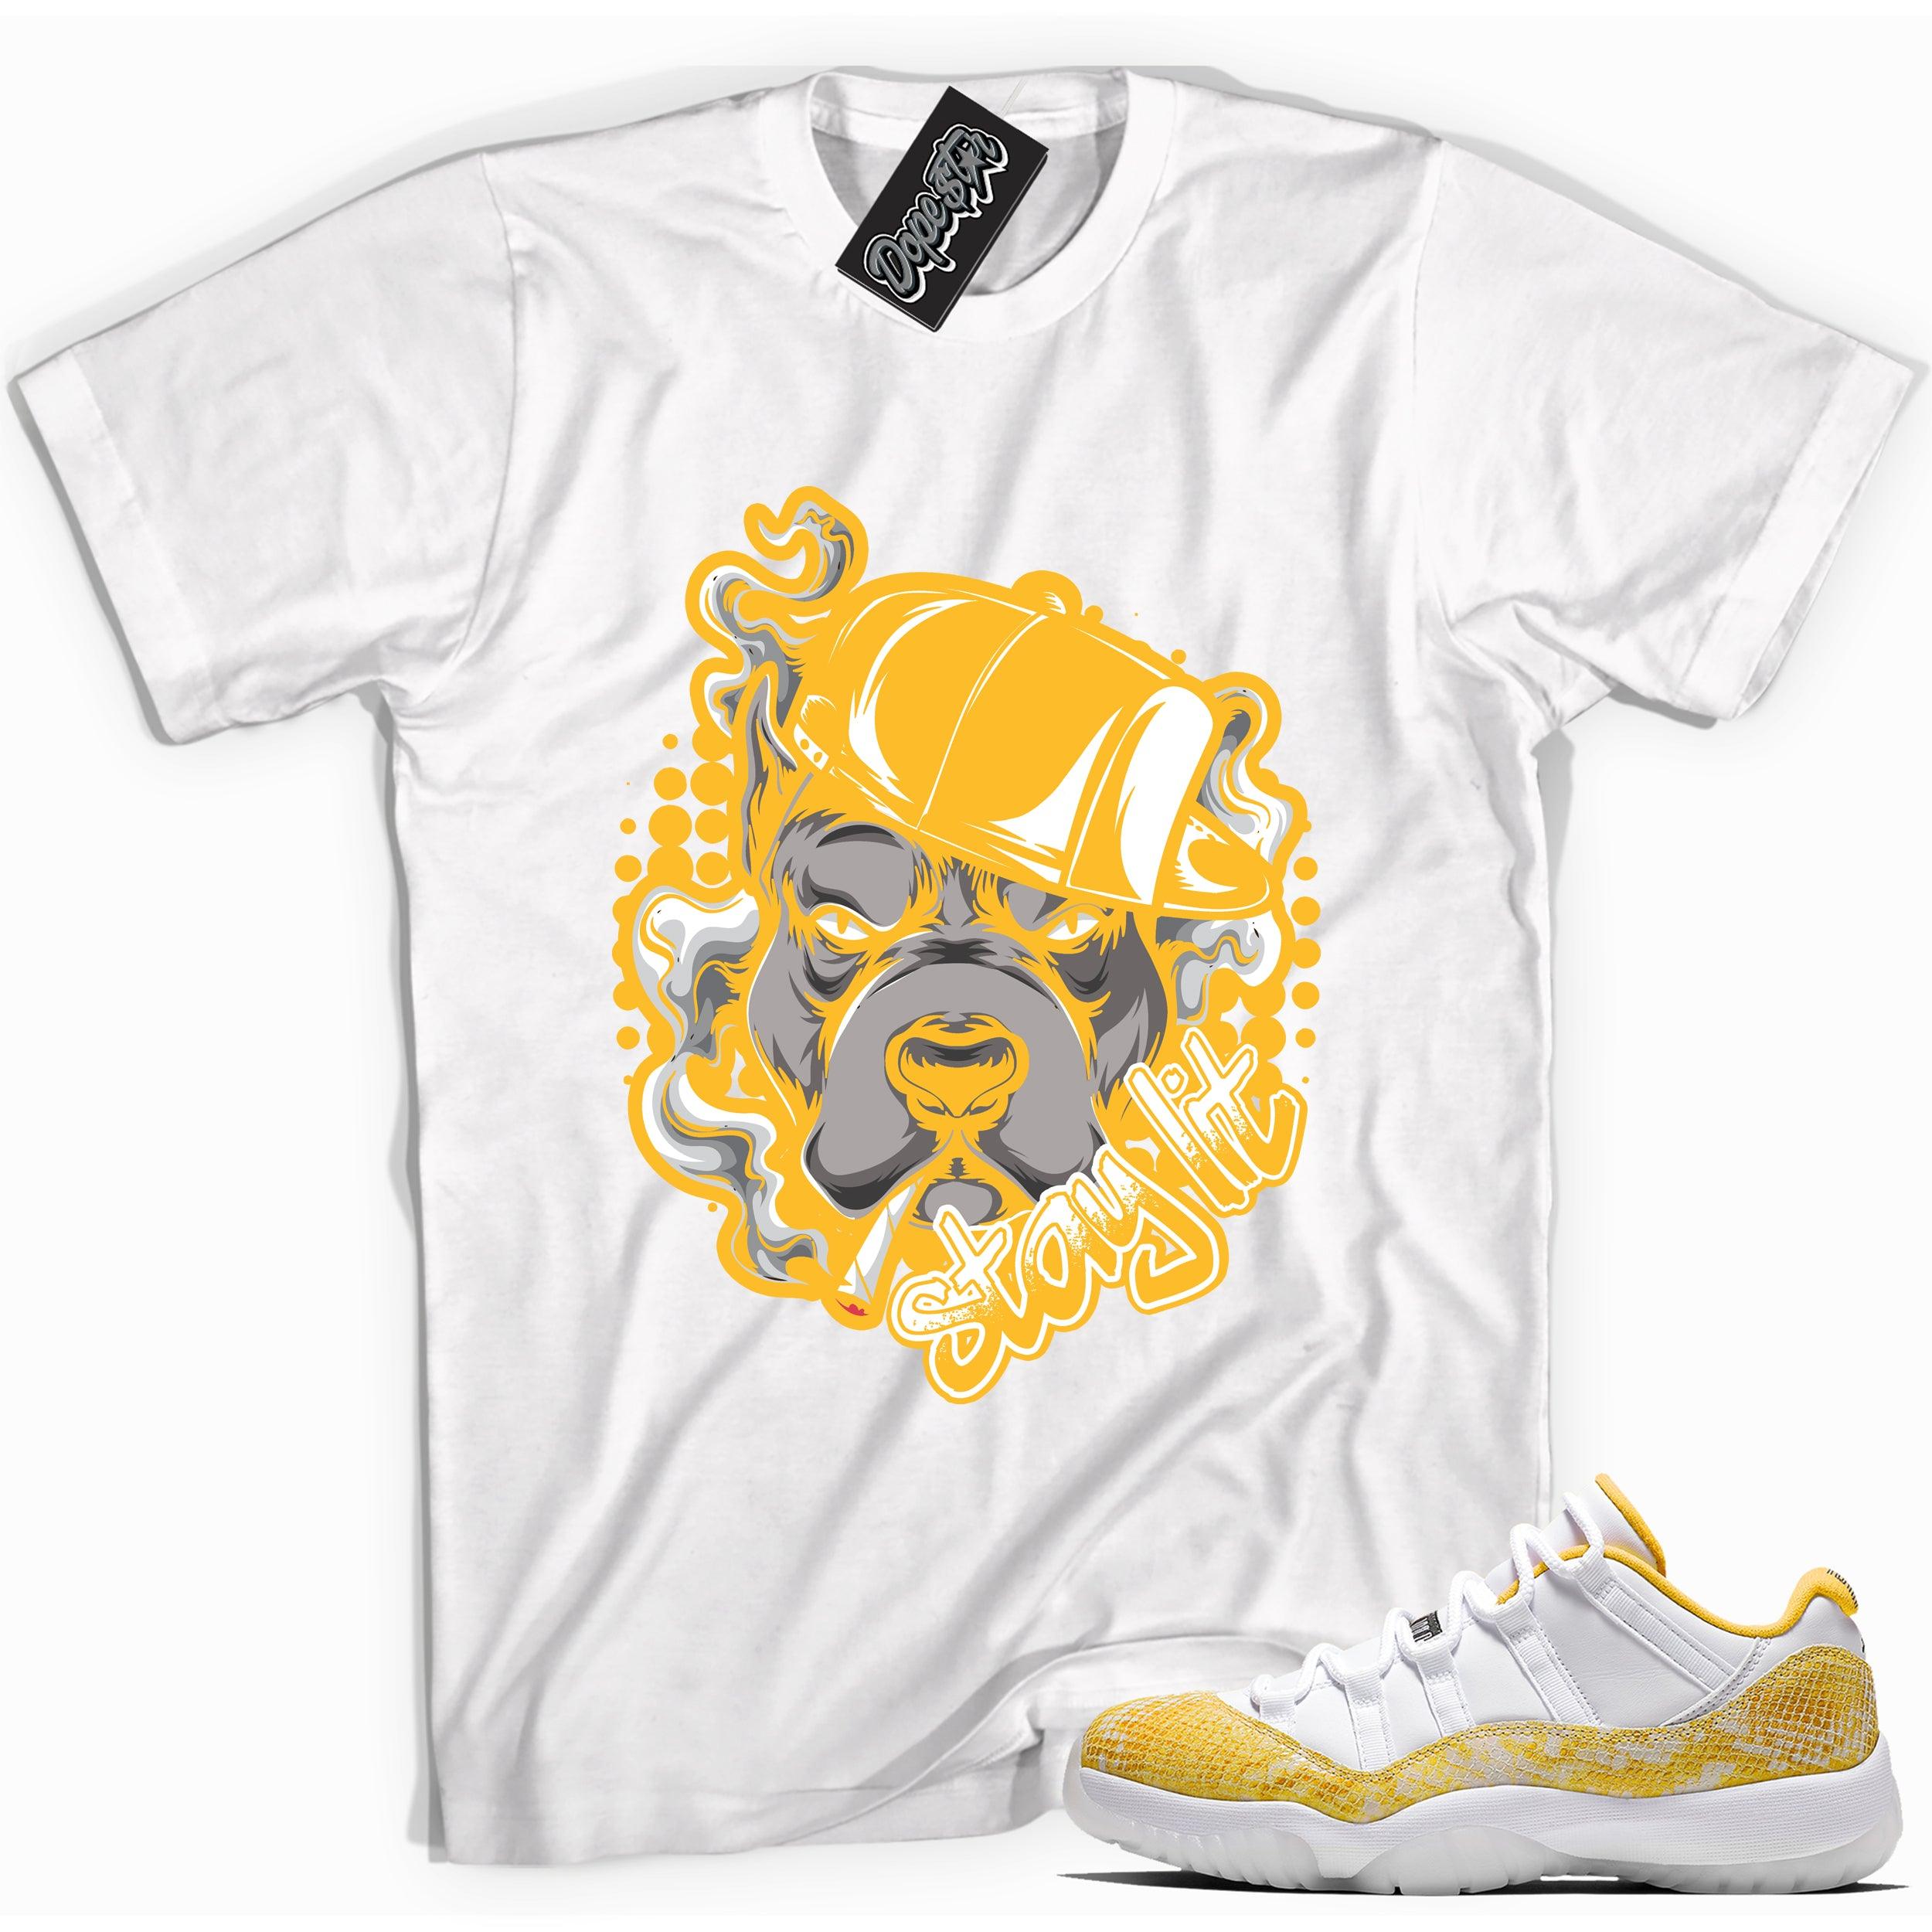 Cool white graphic tee with 'stay lit' print, that perfectly matches Air Jordan 11 Retro Low Yellow Snakeskin sneakers